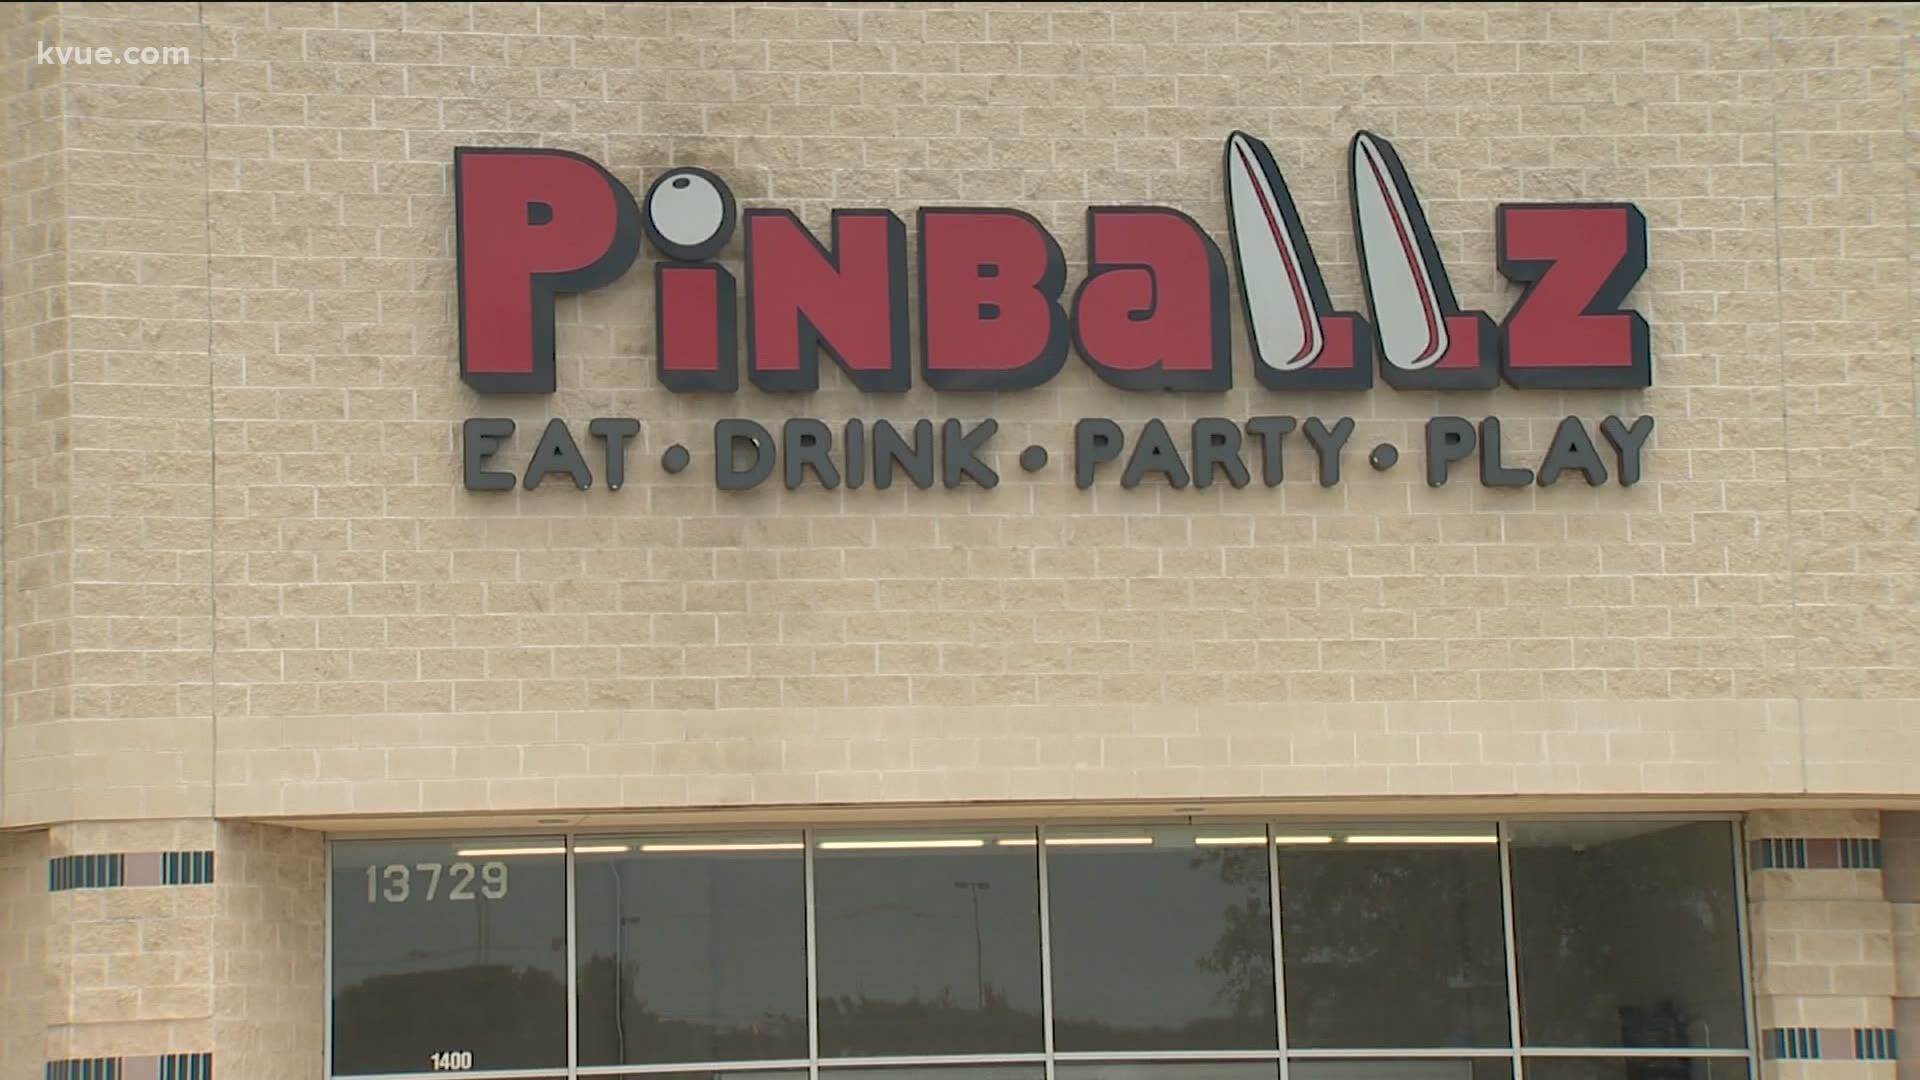 Austin arcade Pinballz says it has fully reopened all of its locations, but Gov. Abbott's orders state that's not allowed just yet.